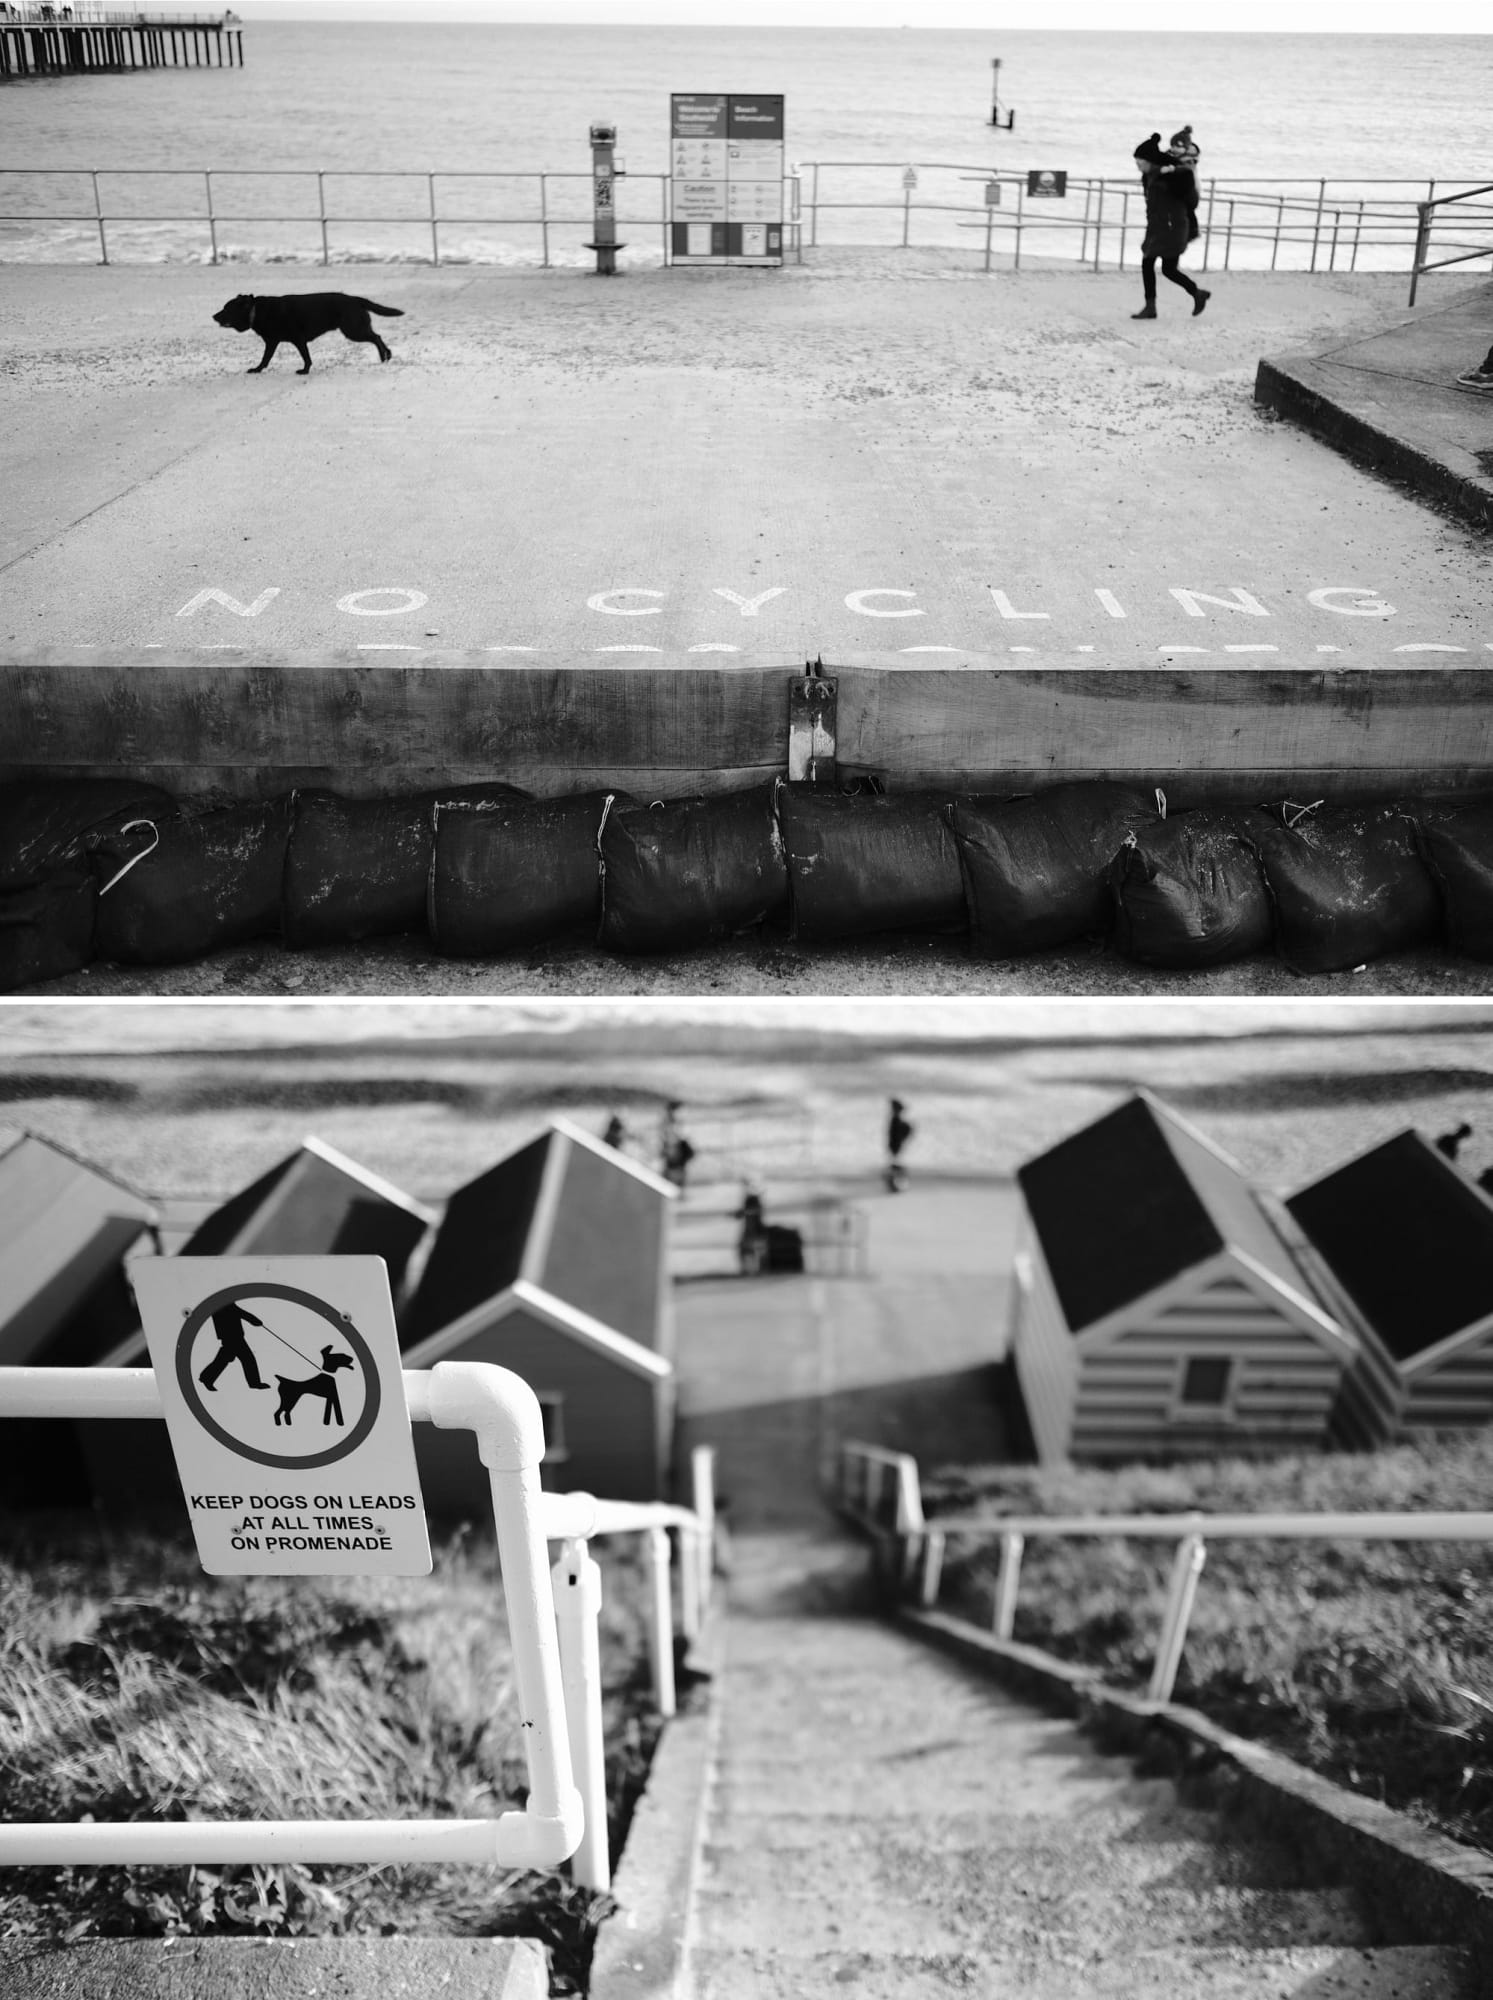 dog running on seafront / steps down to seafront